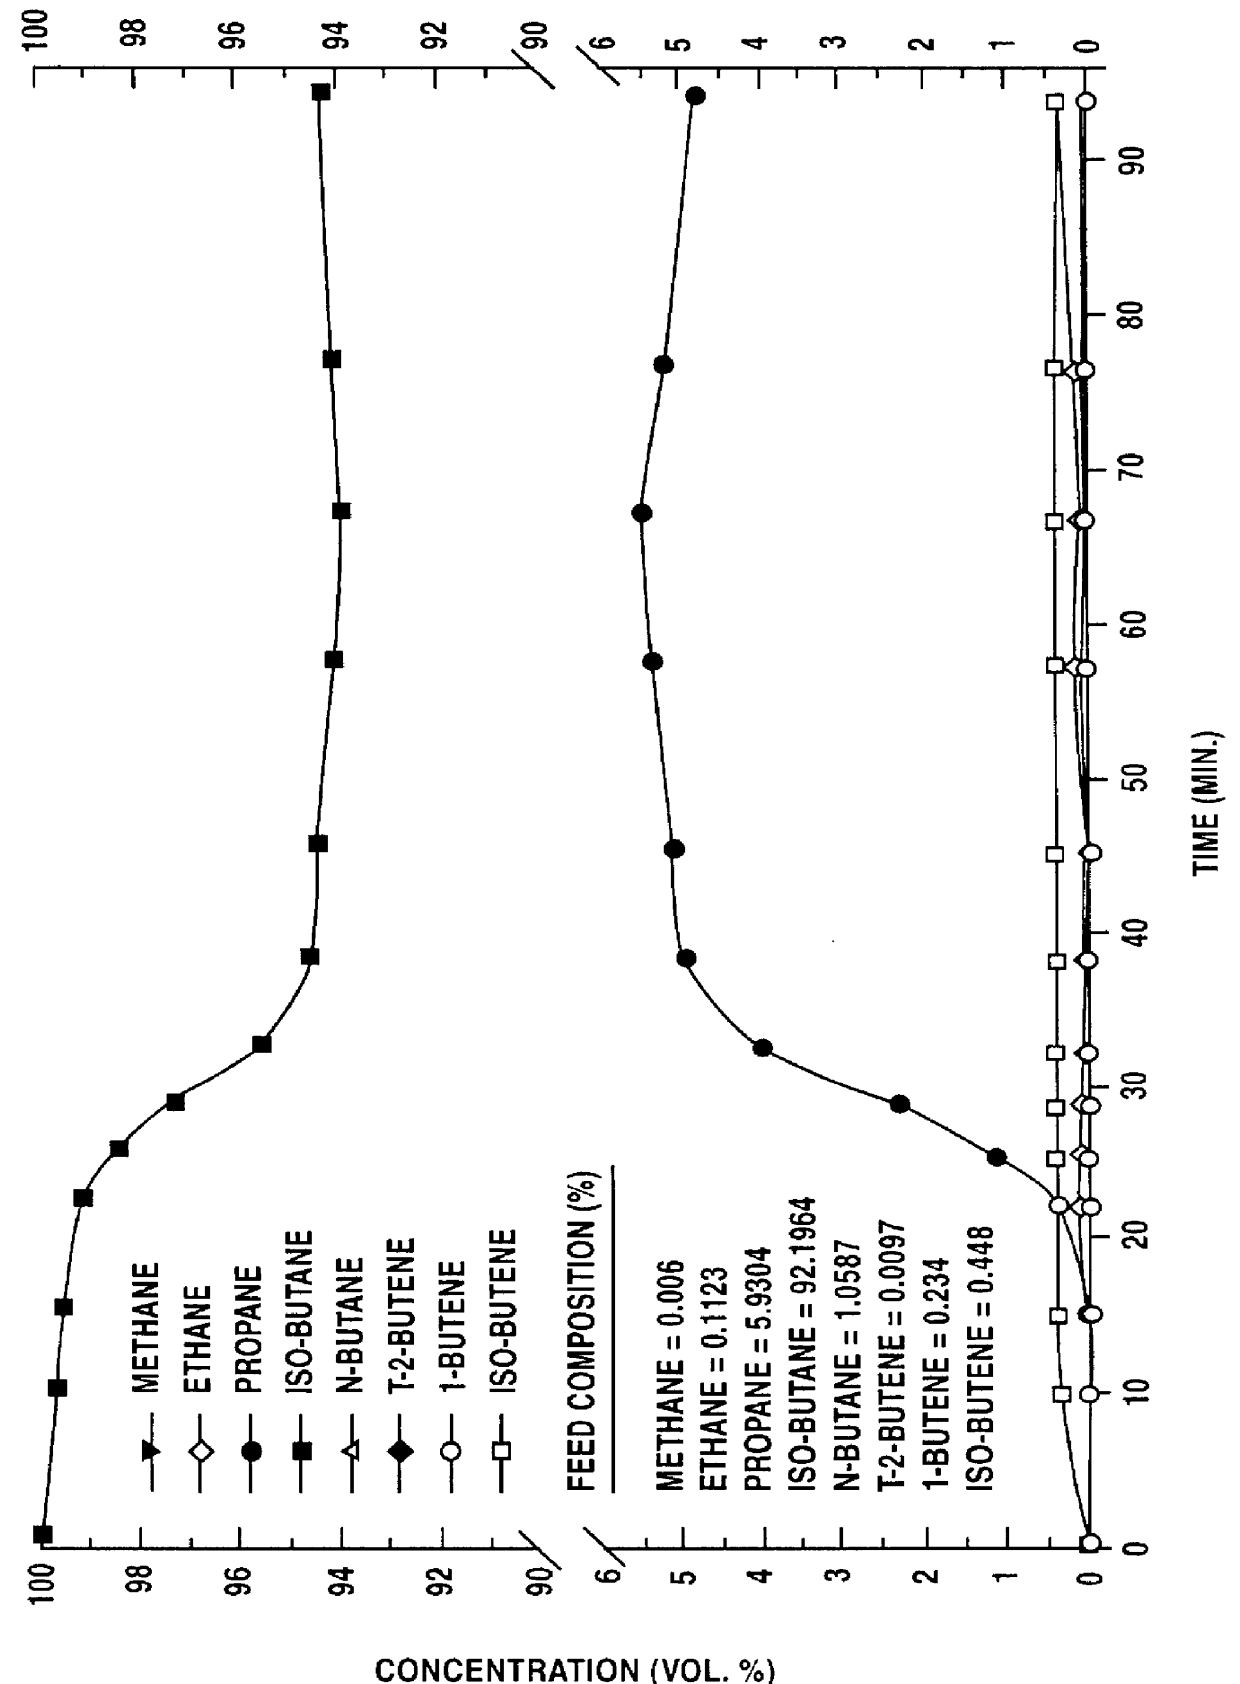 Adsorption separation and purification apparatus and process for high purity isobutane production